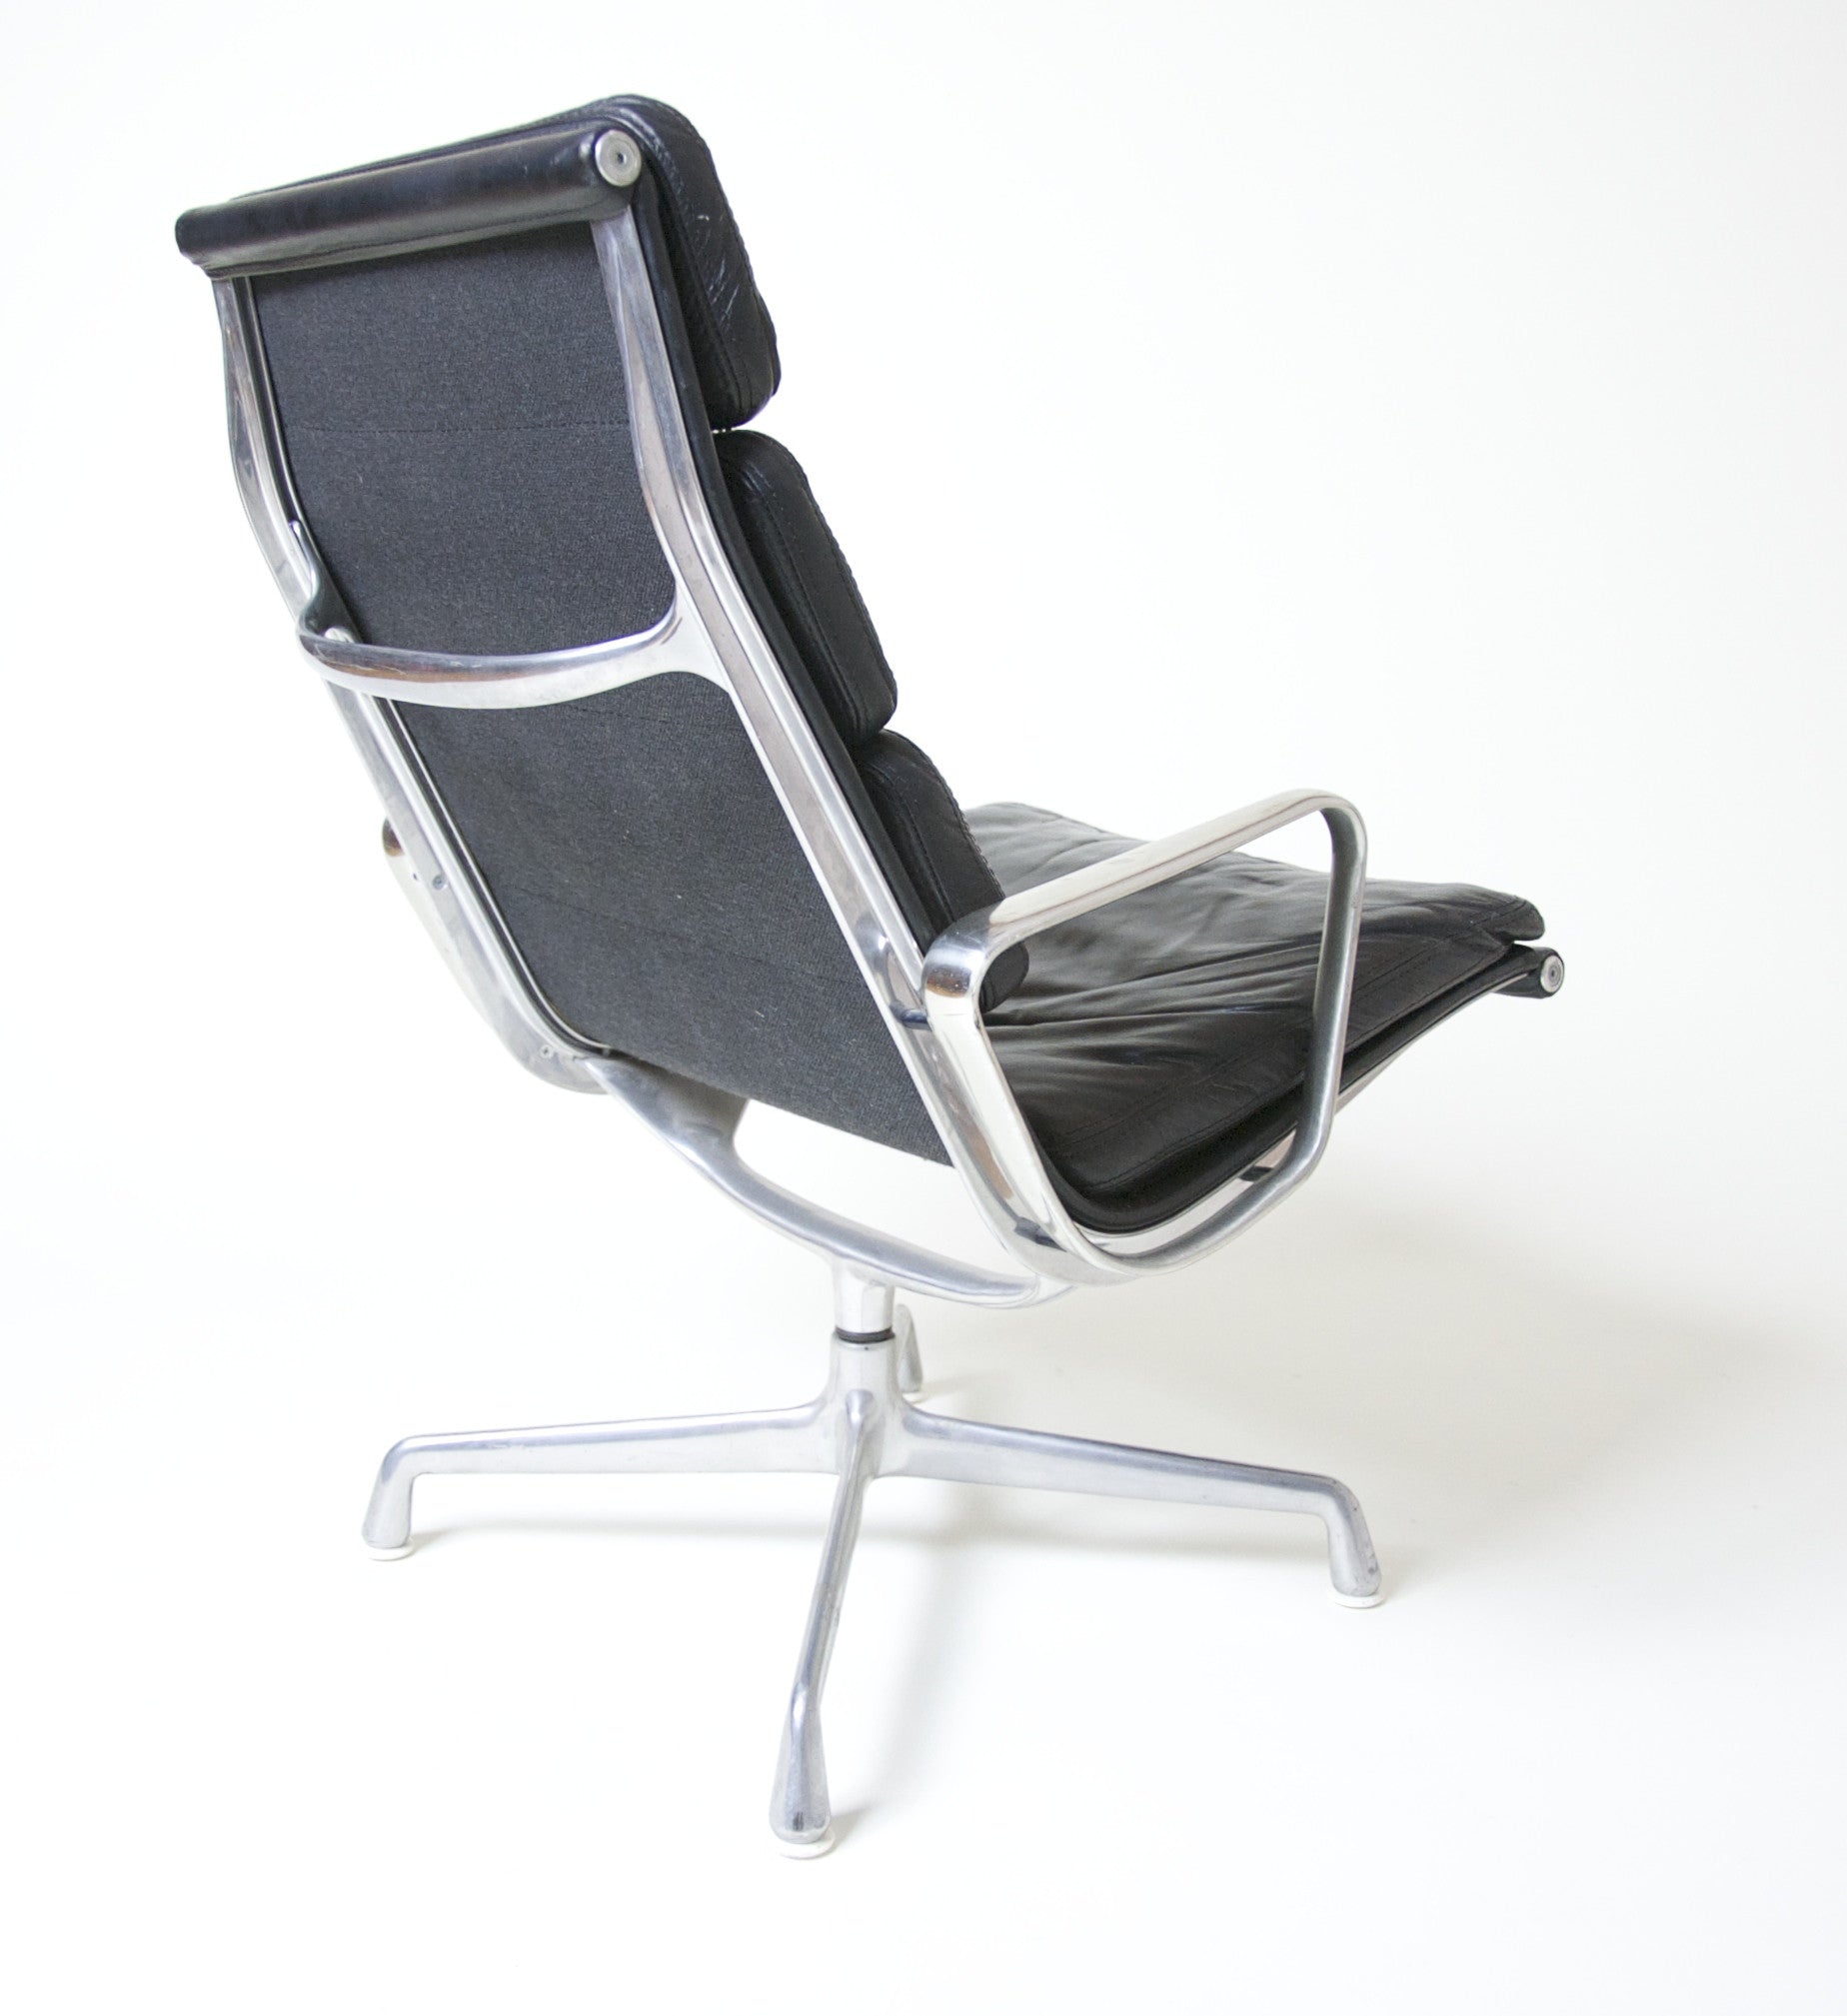 SOLD Eames Herman Miller Soft Pad Lounge Chair #3